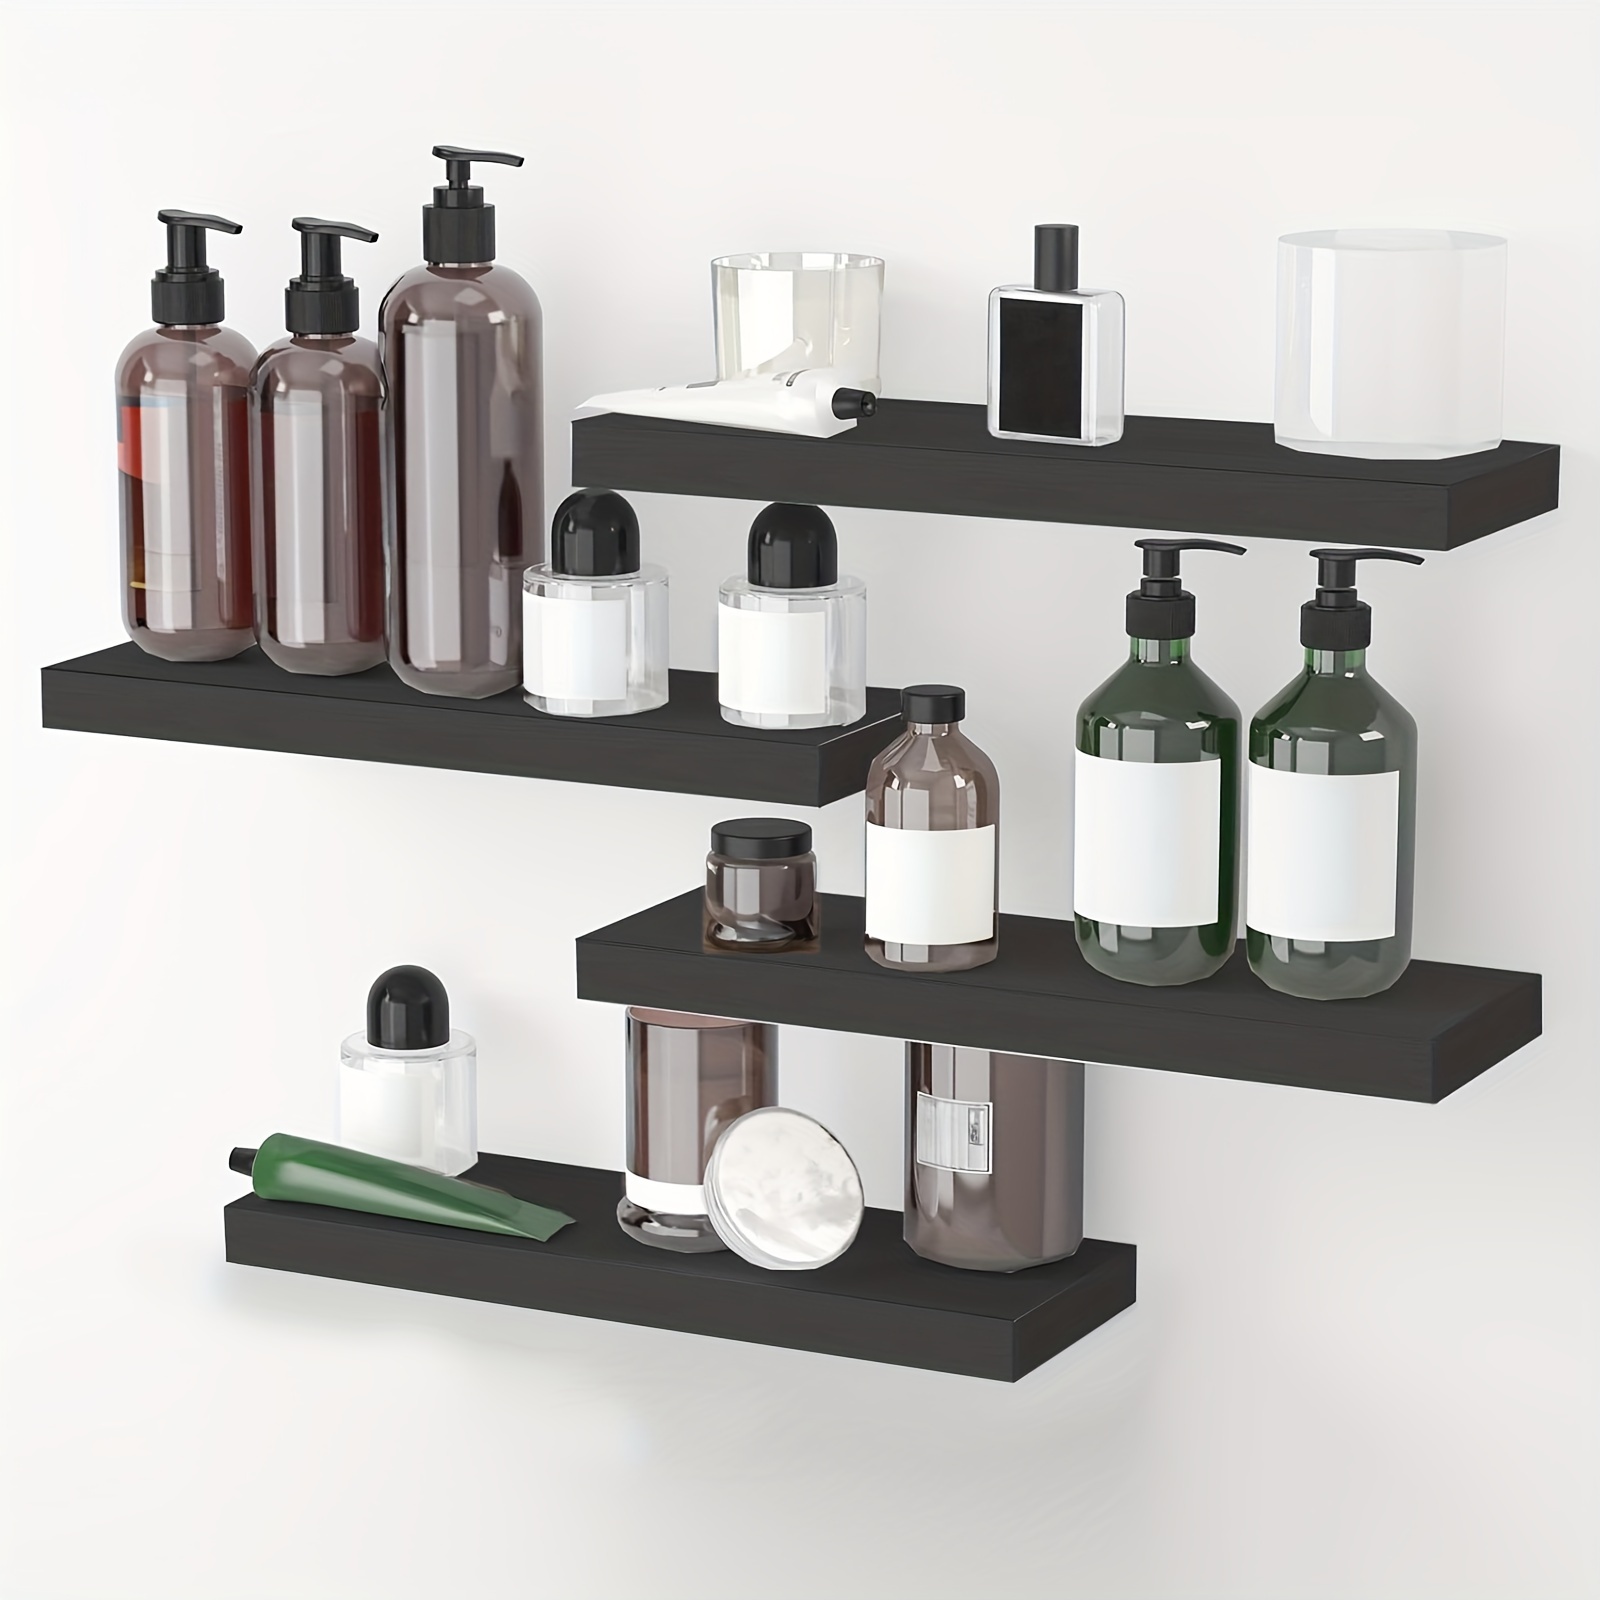 

Toiletries And Towels Shelves, Black, Bathroom Floating Shelves, 4+1 Tier 15.7in Rustic Wall Shelf Over Toilet With Invisible Brackets, Farmhouse Wall Decor